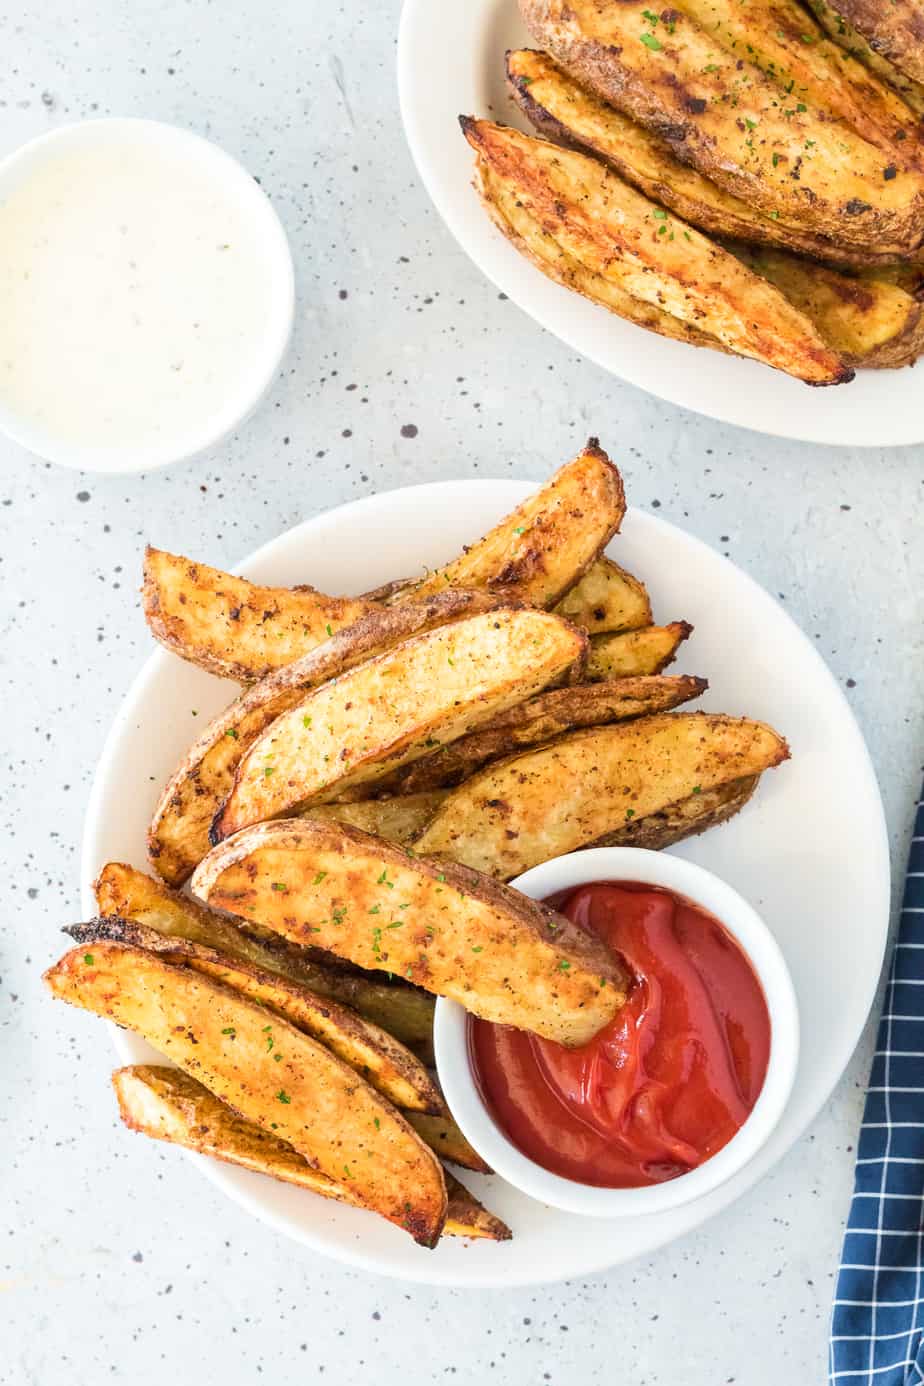 Crispy potato wedges on a serving platter from overhead with bowls of ketchup and ranch for dipping on the table